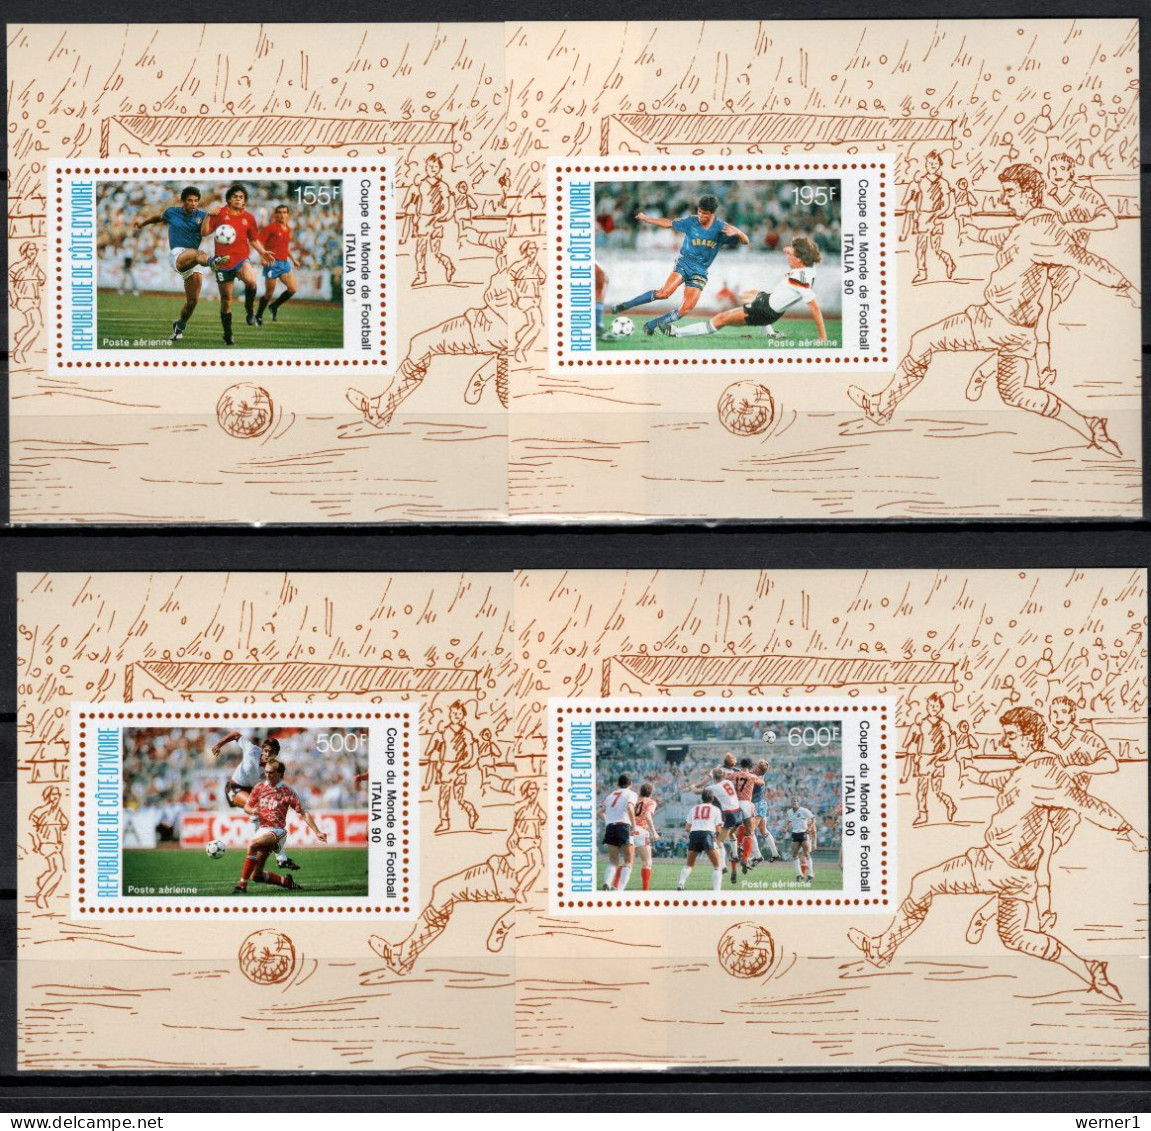 Ivory Coast 1990 Football Soccer World Cup Set Of 4 S/s Imperf. MNH -scarce- - 1990 – Italië